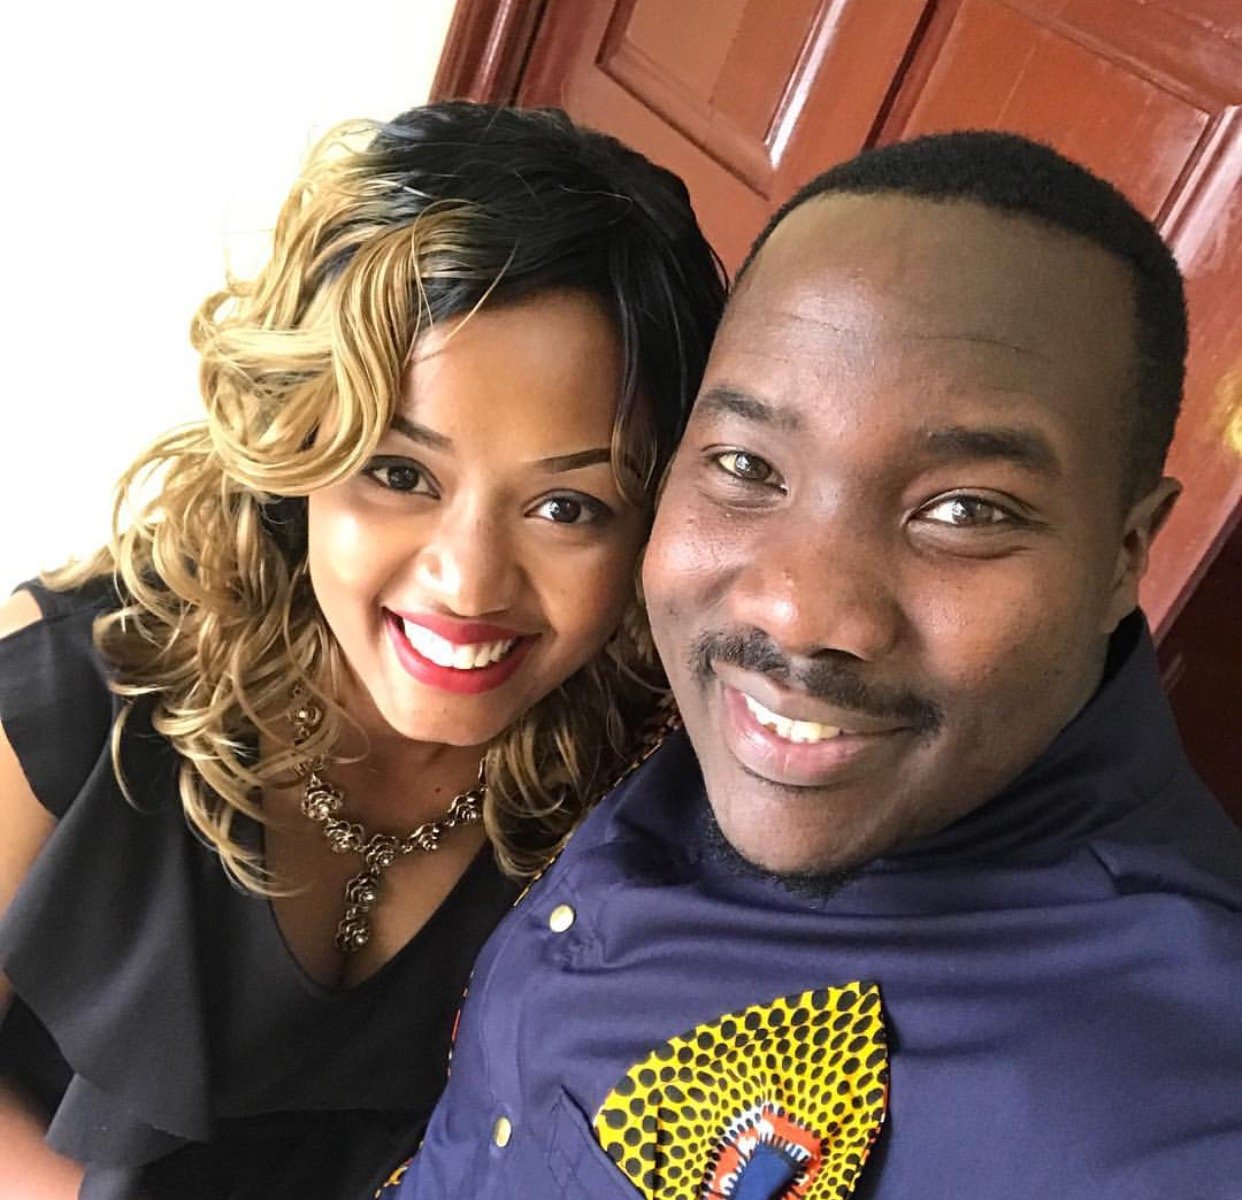 Citizen TV’s Willis Raburu opens up about the main reason he was forced to lose weight